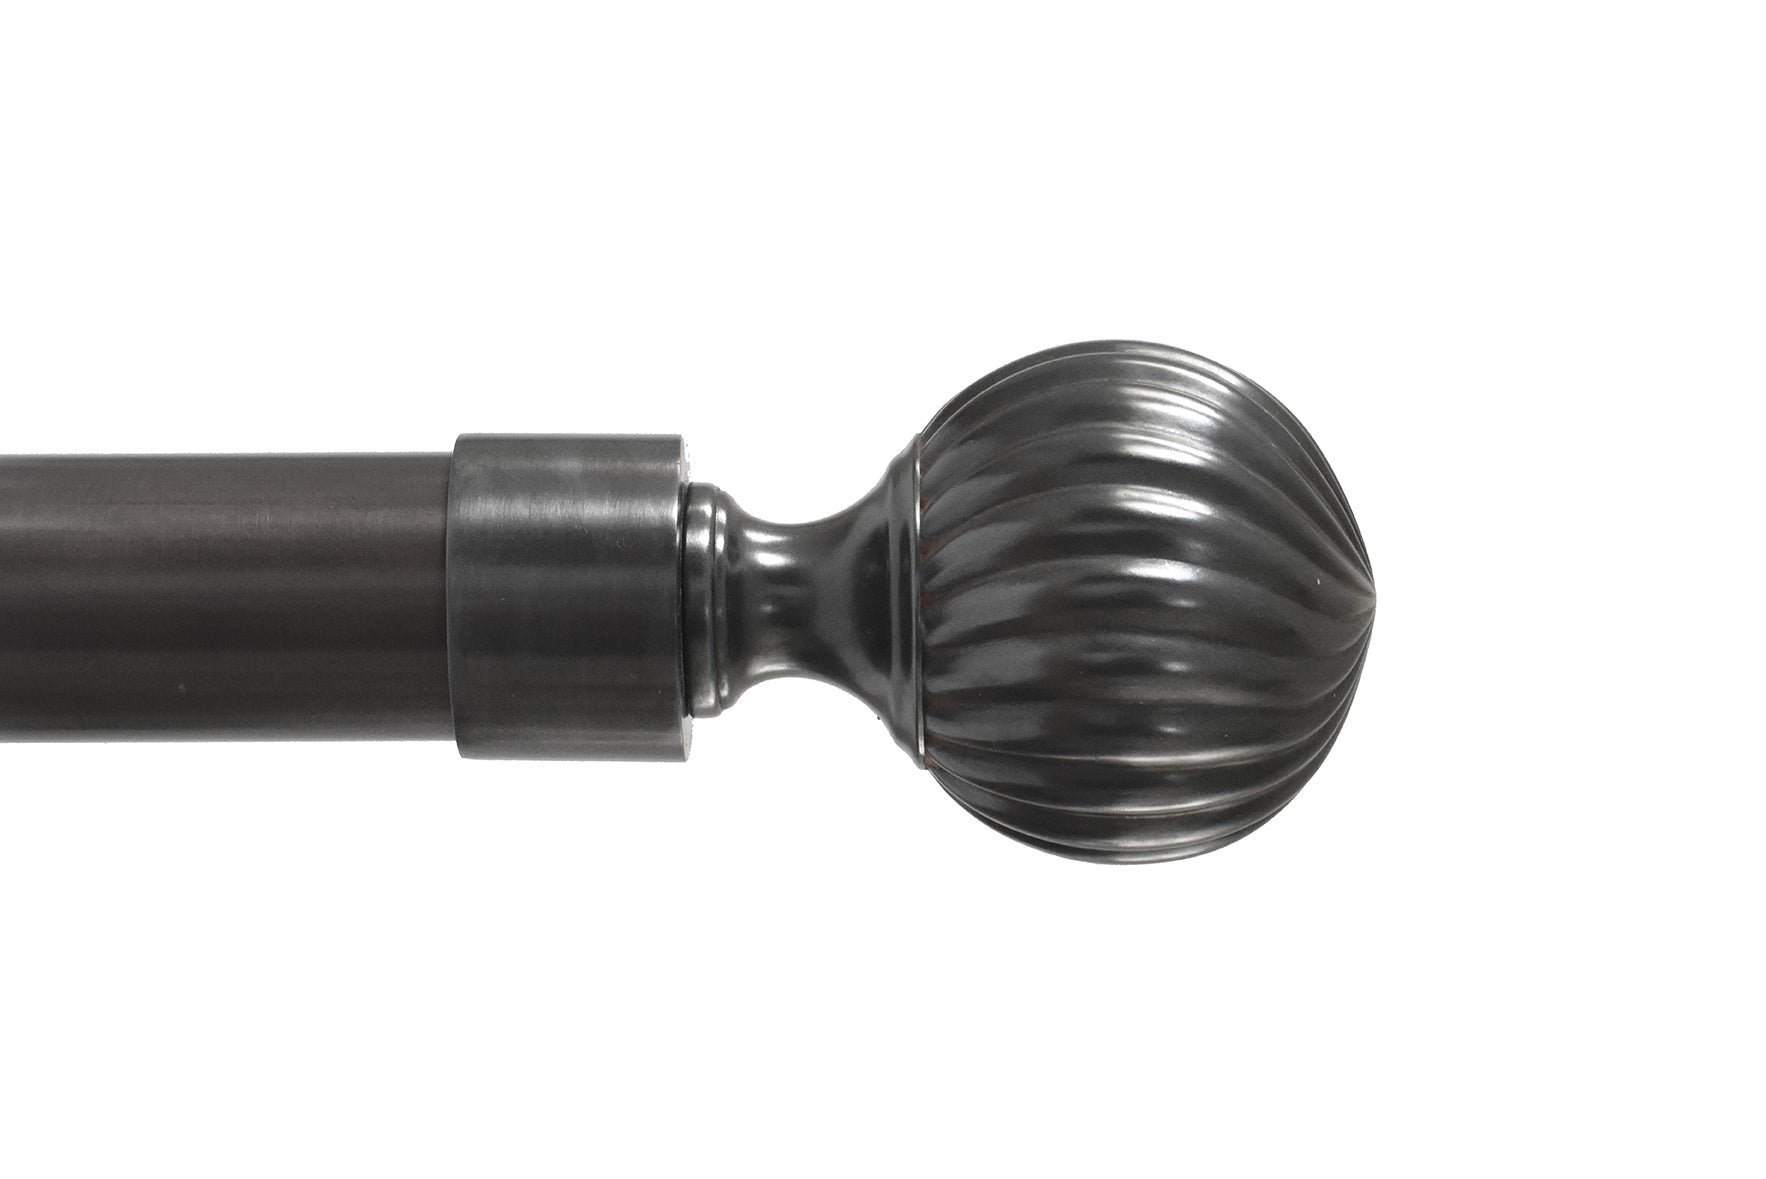 Tillys Twisted Ball Finial Curtain Pole Set in Gunmetal